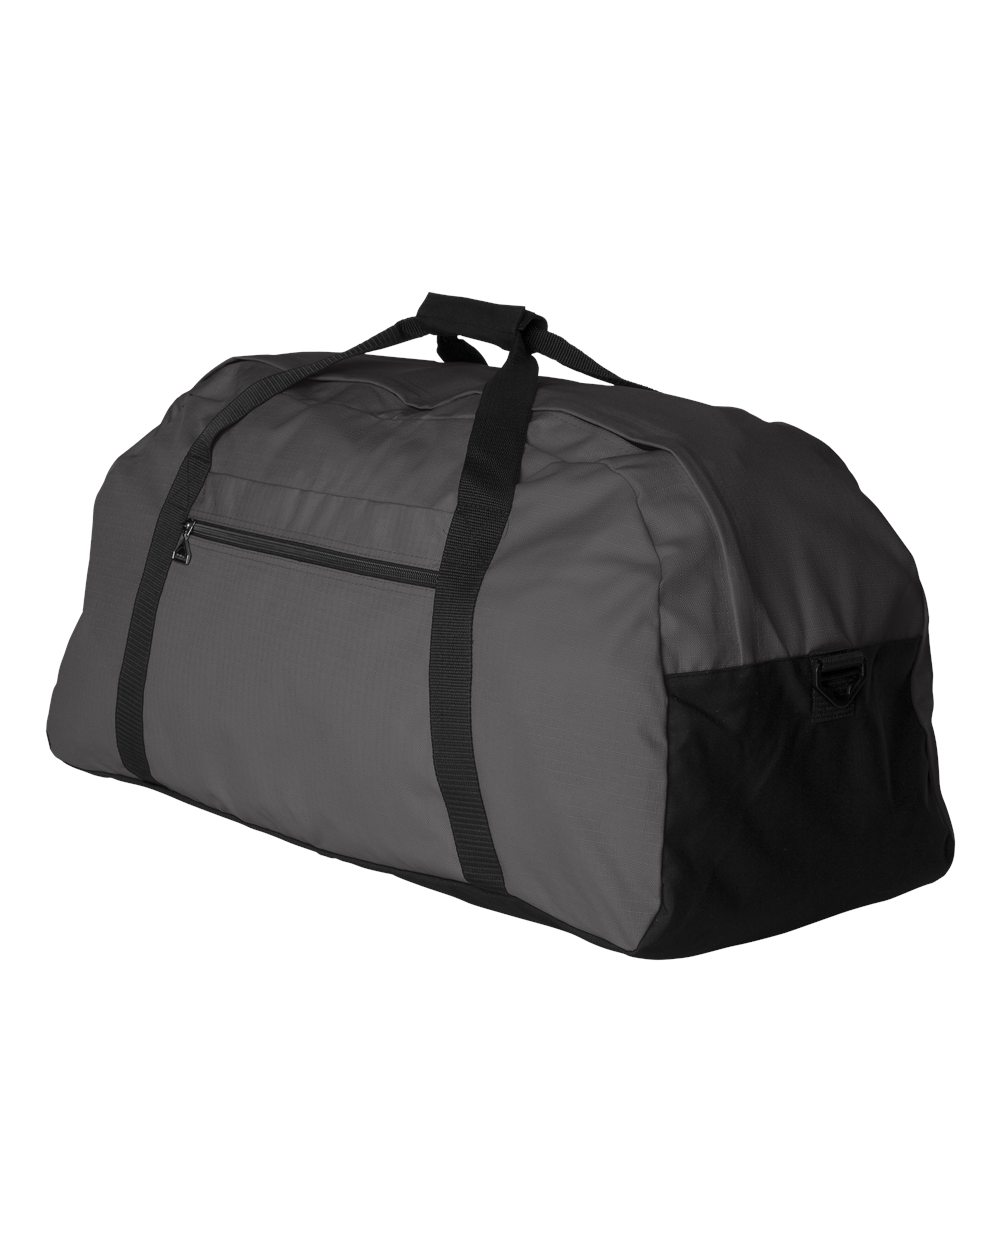 Augusta 1703A Large Ripstop Duffel Bag - Graphite & Black- ALL - image 2 of 5